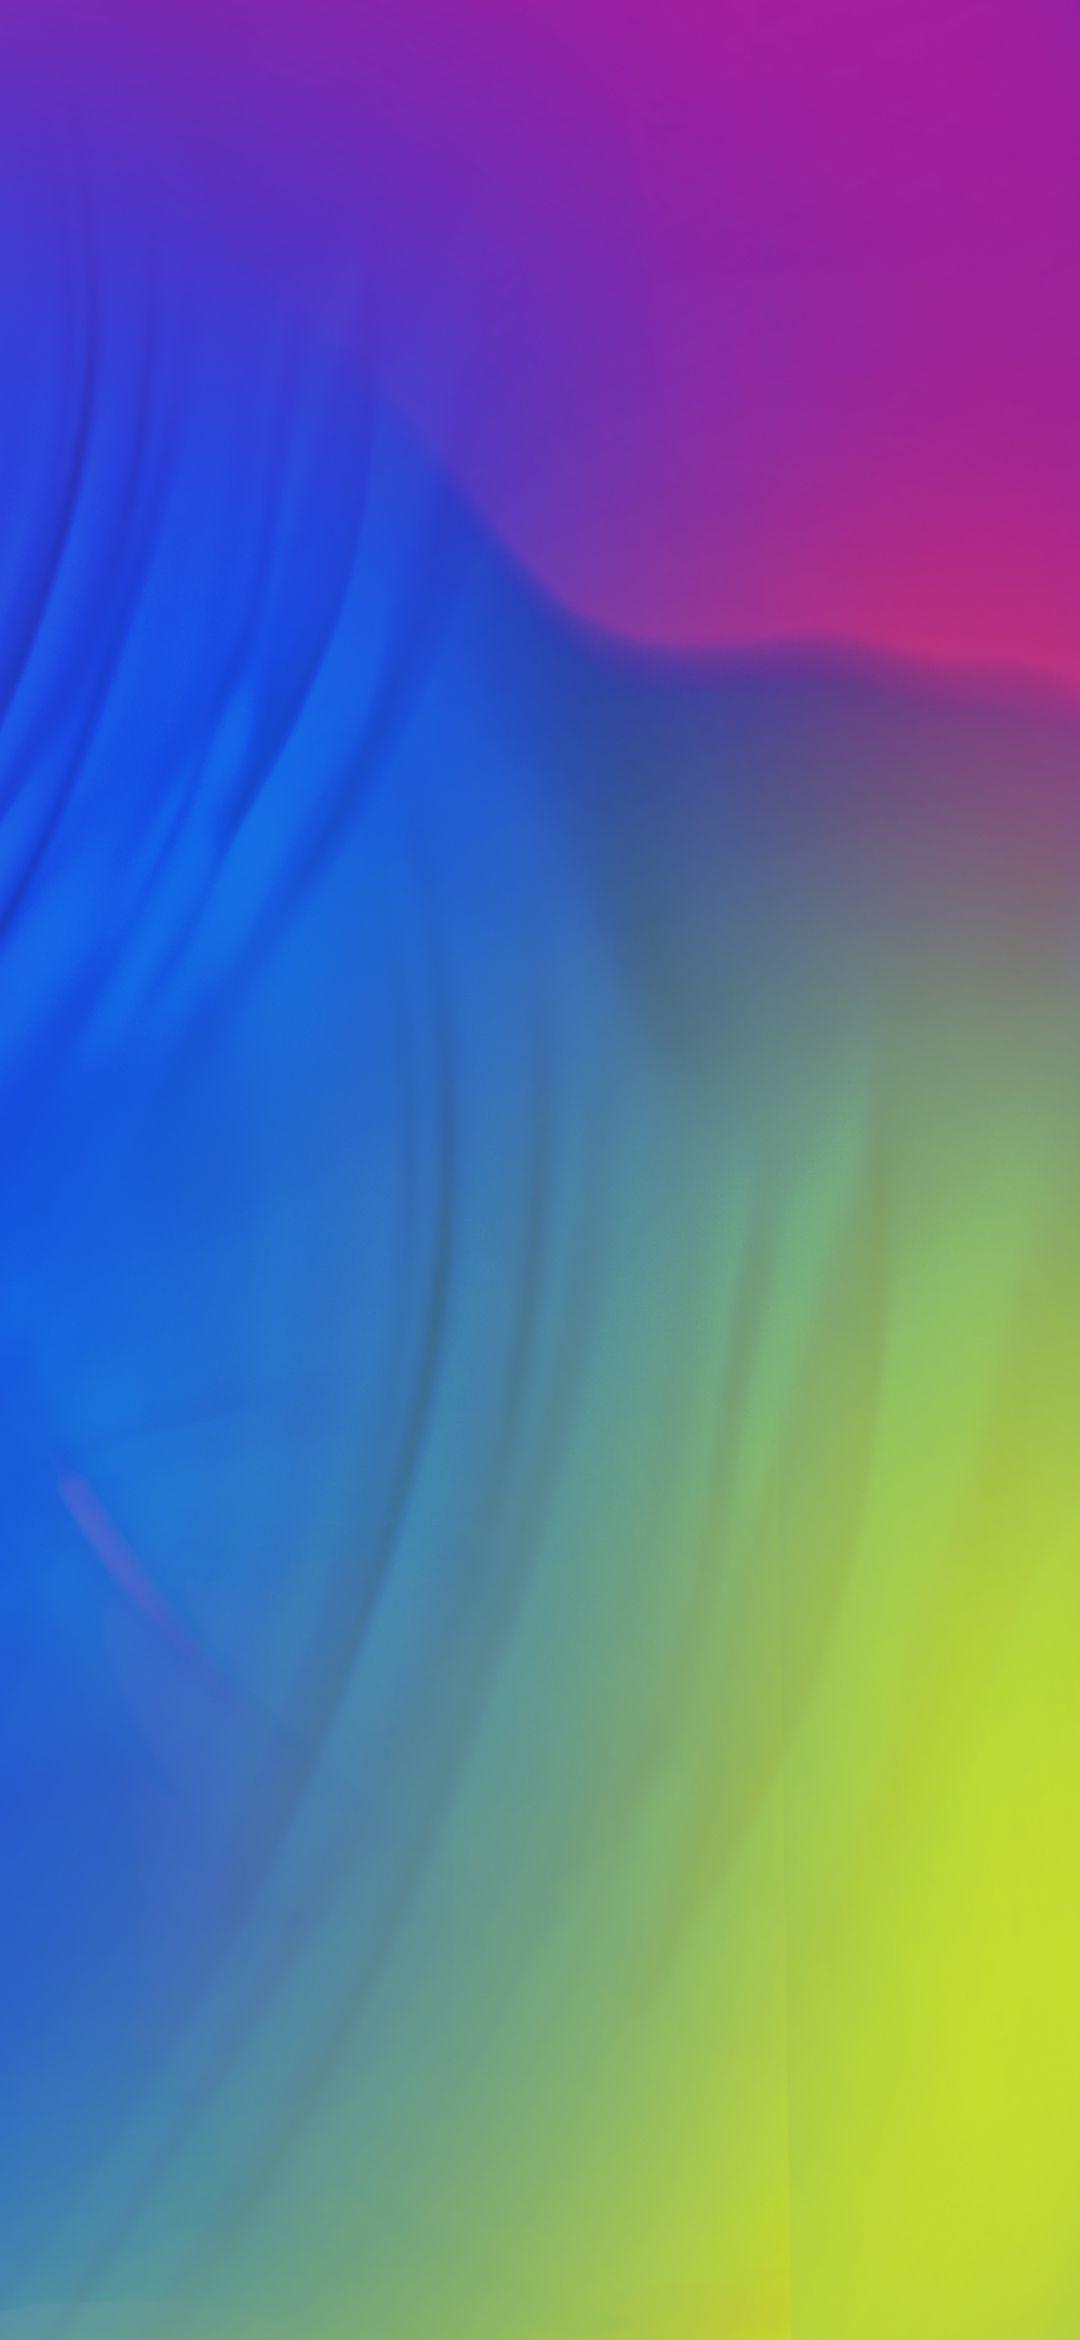 Download Samsung Galaxy M40 Official Wallpapers Here! Full